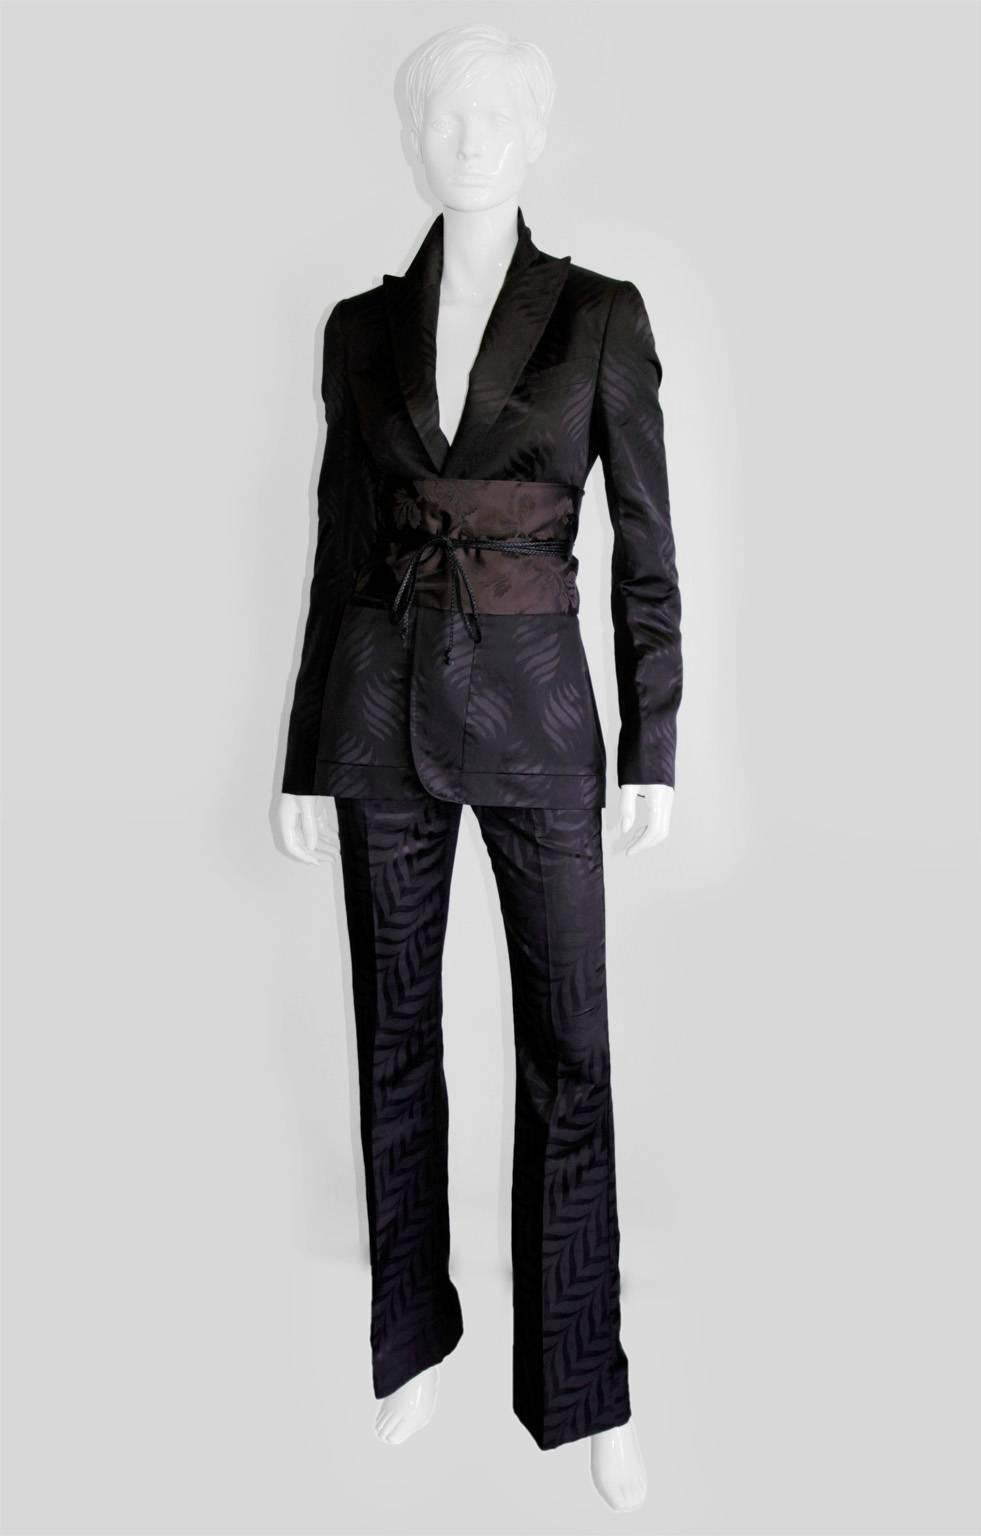 Who could ever forget Tom Ford's fall/winter 2002 Gothic Collection for Gucci... with that dark chinoiseriesque styling & heavenly detailing? Well, this extraordinary aubergine silk pant suit with matching obi belt was one of the absolute 